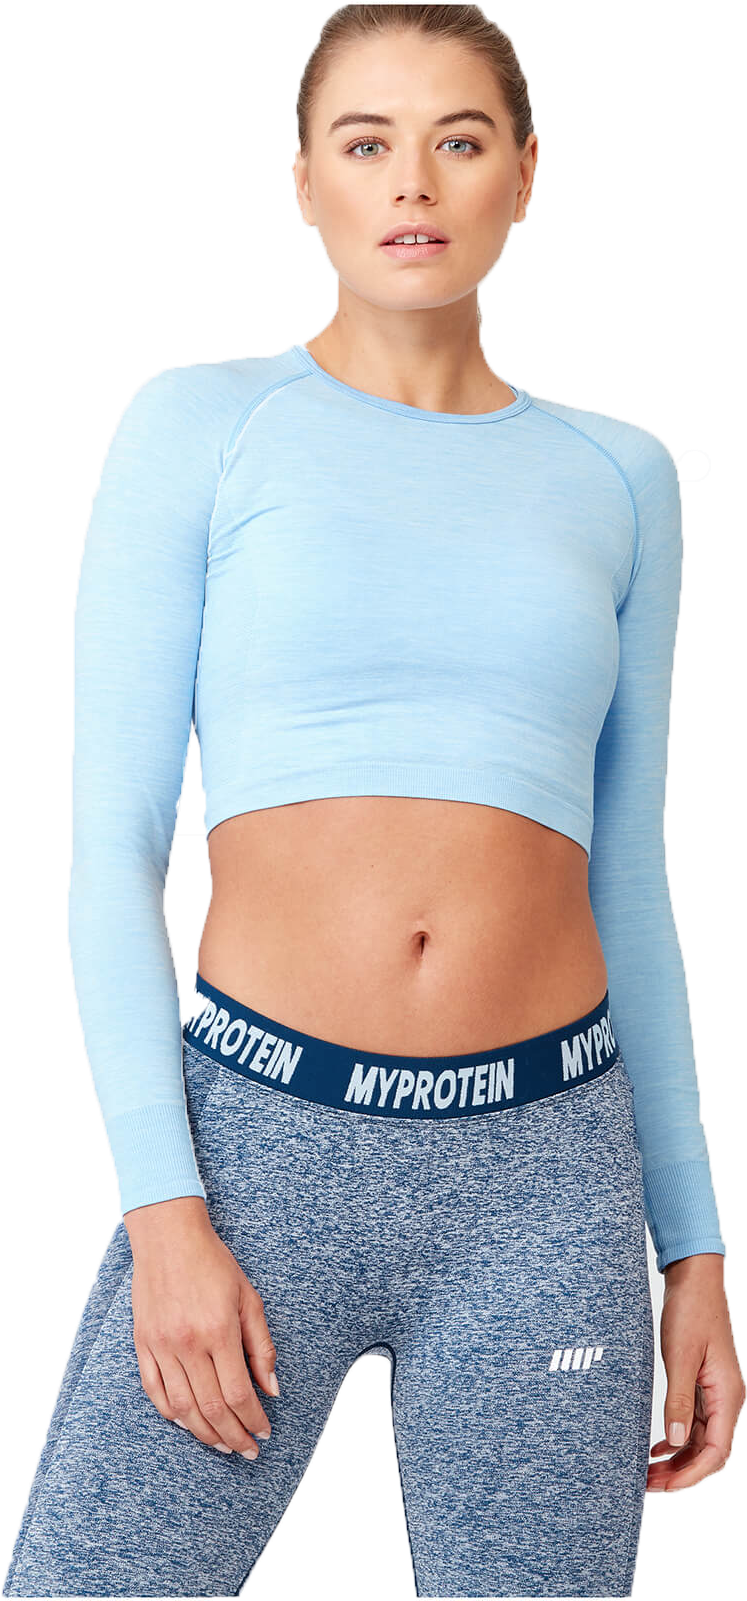 Athletic Womanin Blue Crop Top PNG